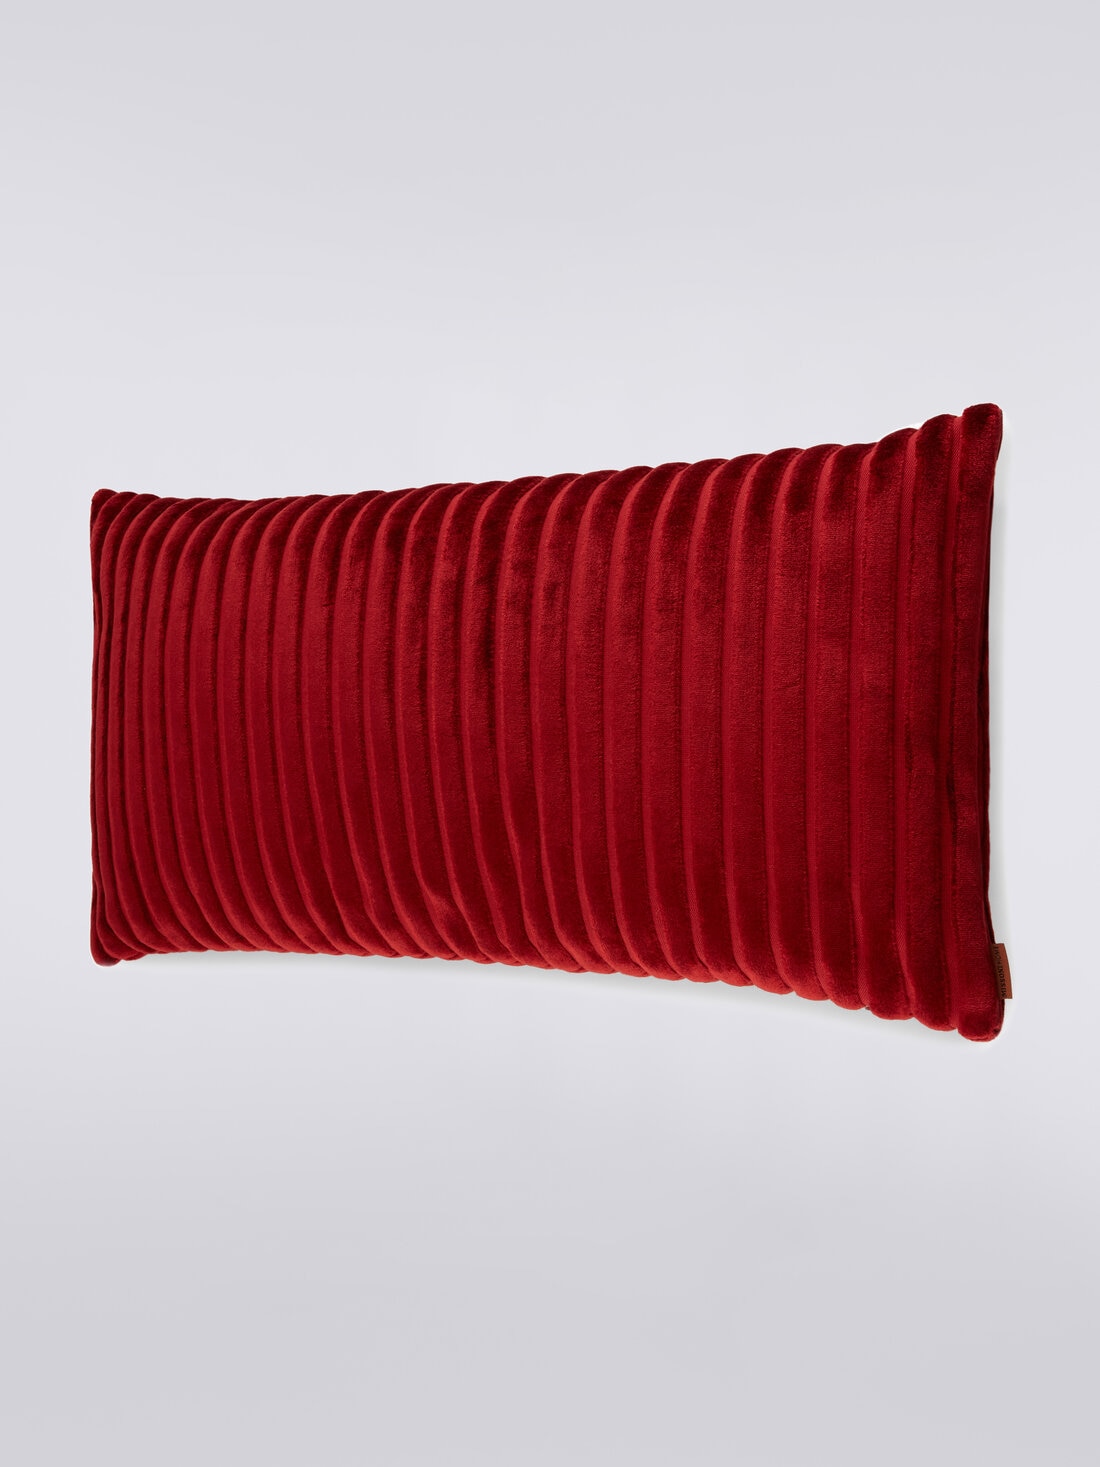 Coomba Coussin 30X60, Rouge  - 8033050074532 - 1